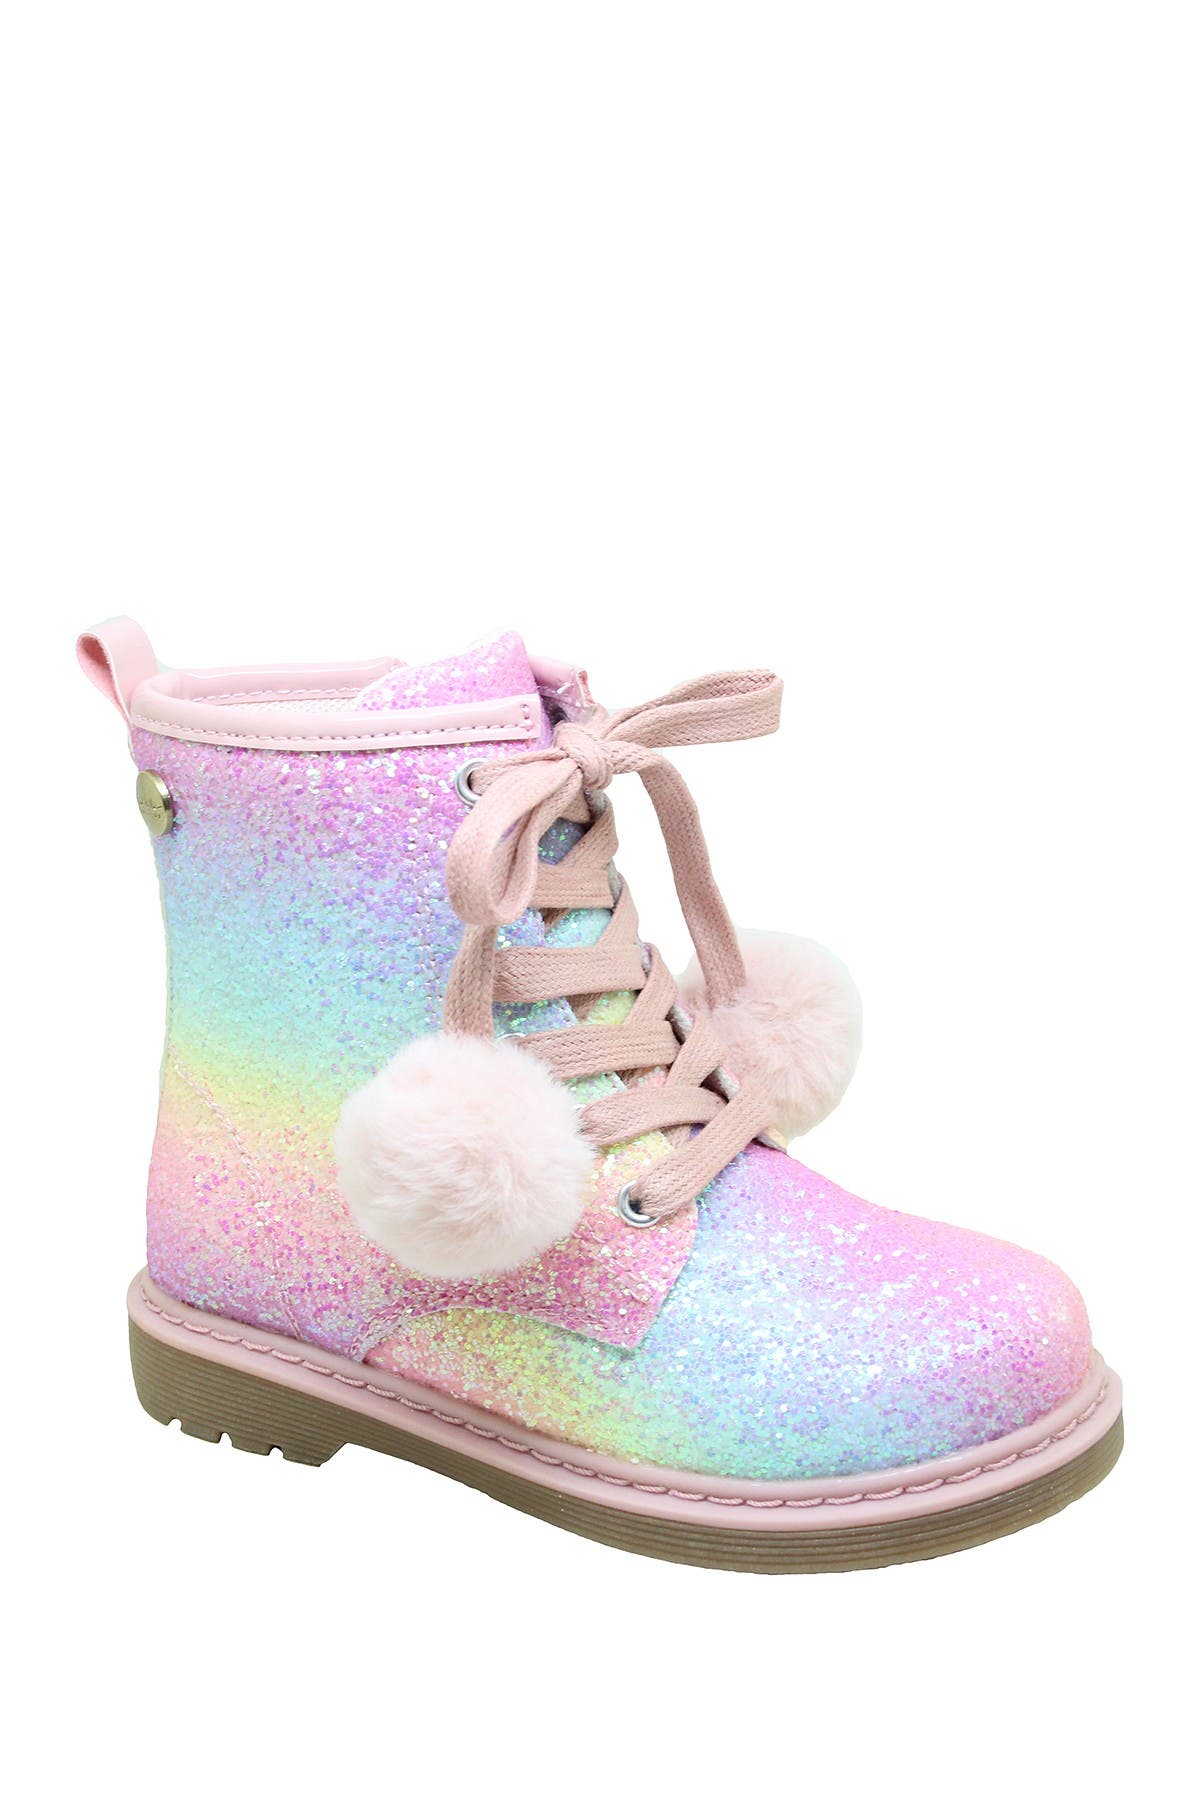 Nicole Miller Kids' Glitter Pompom Lace-up Boot In Pastel Rainbow